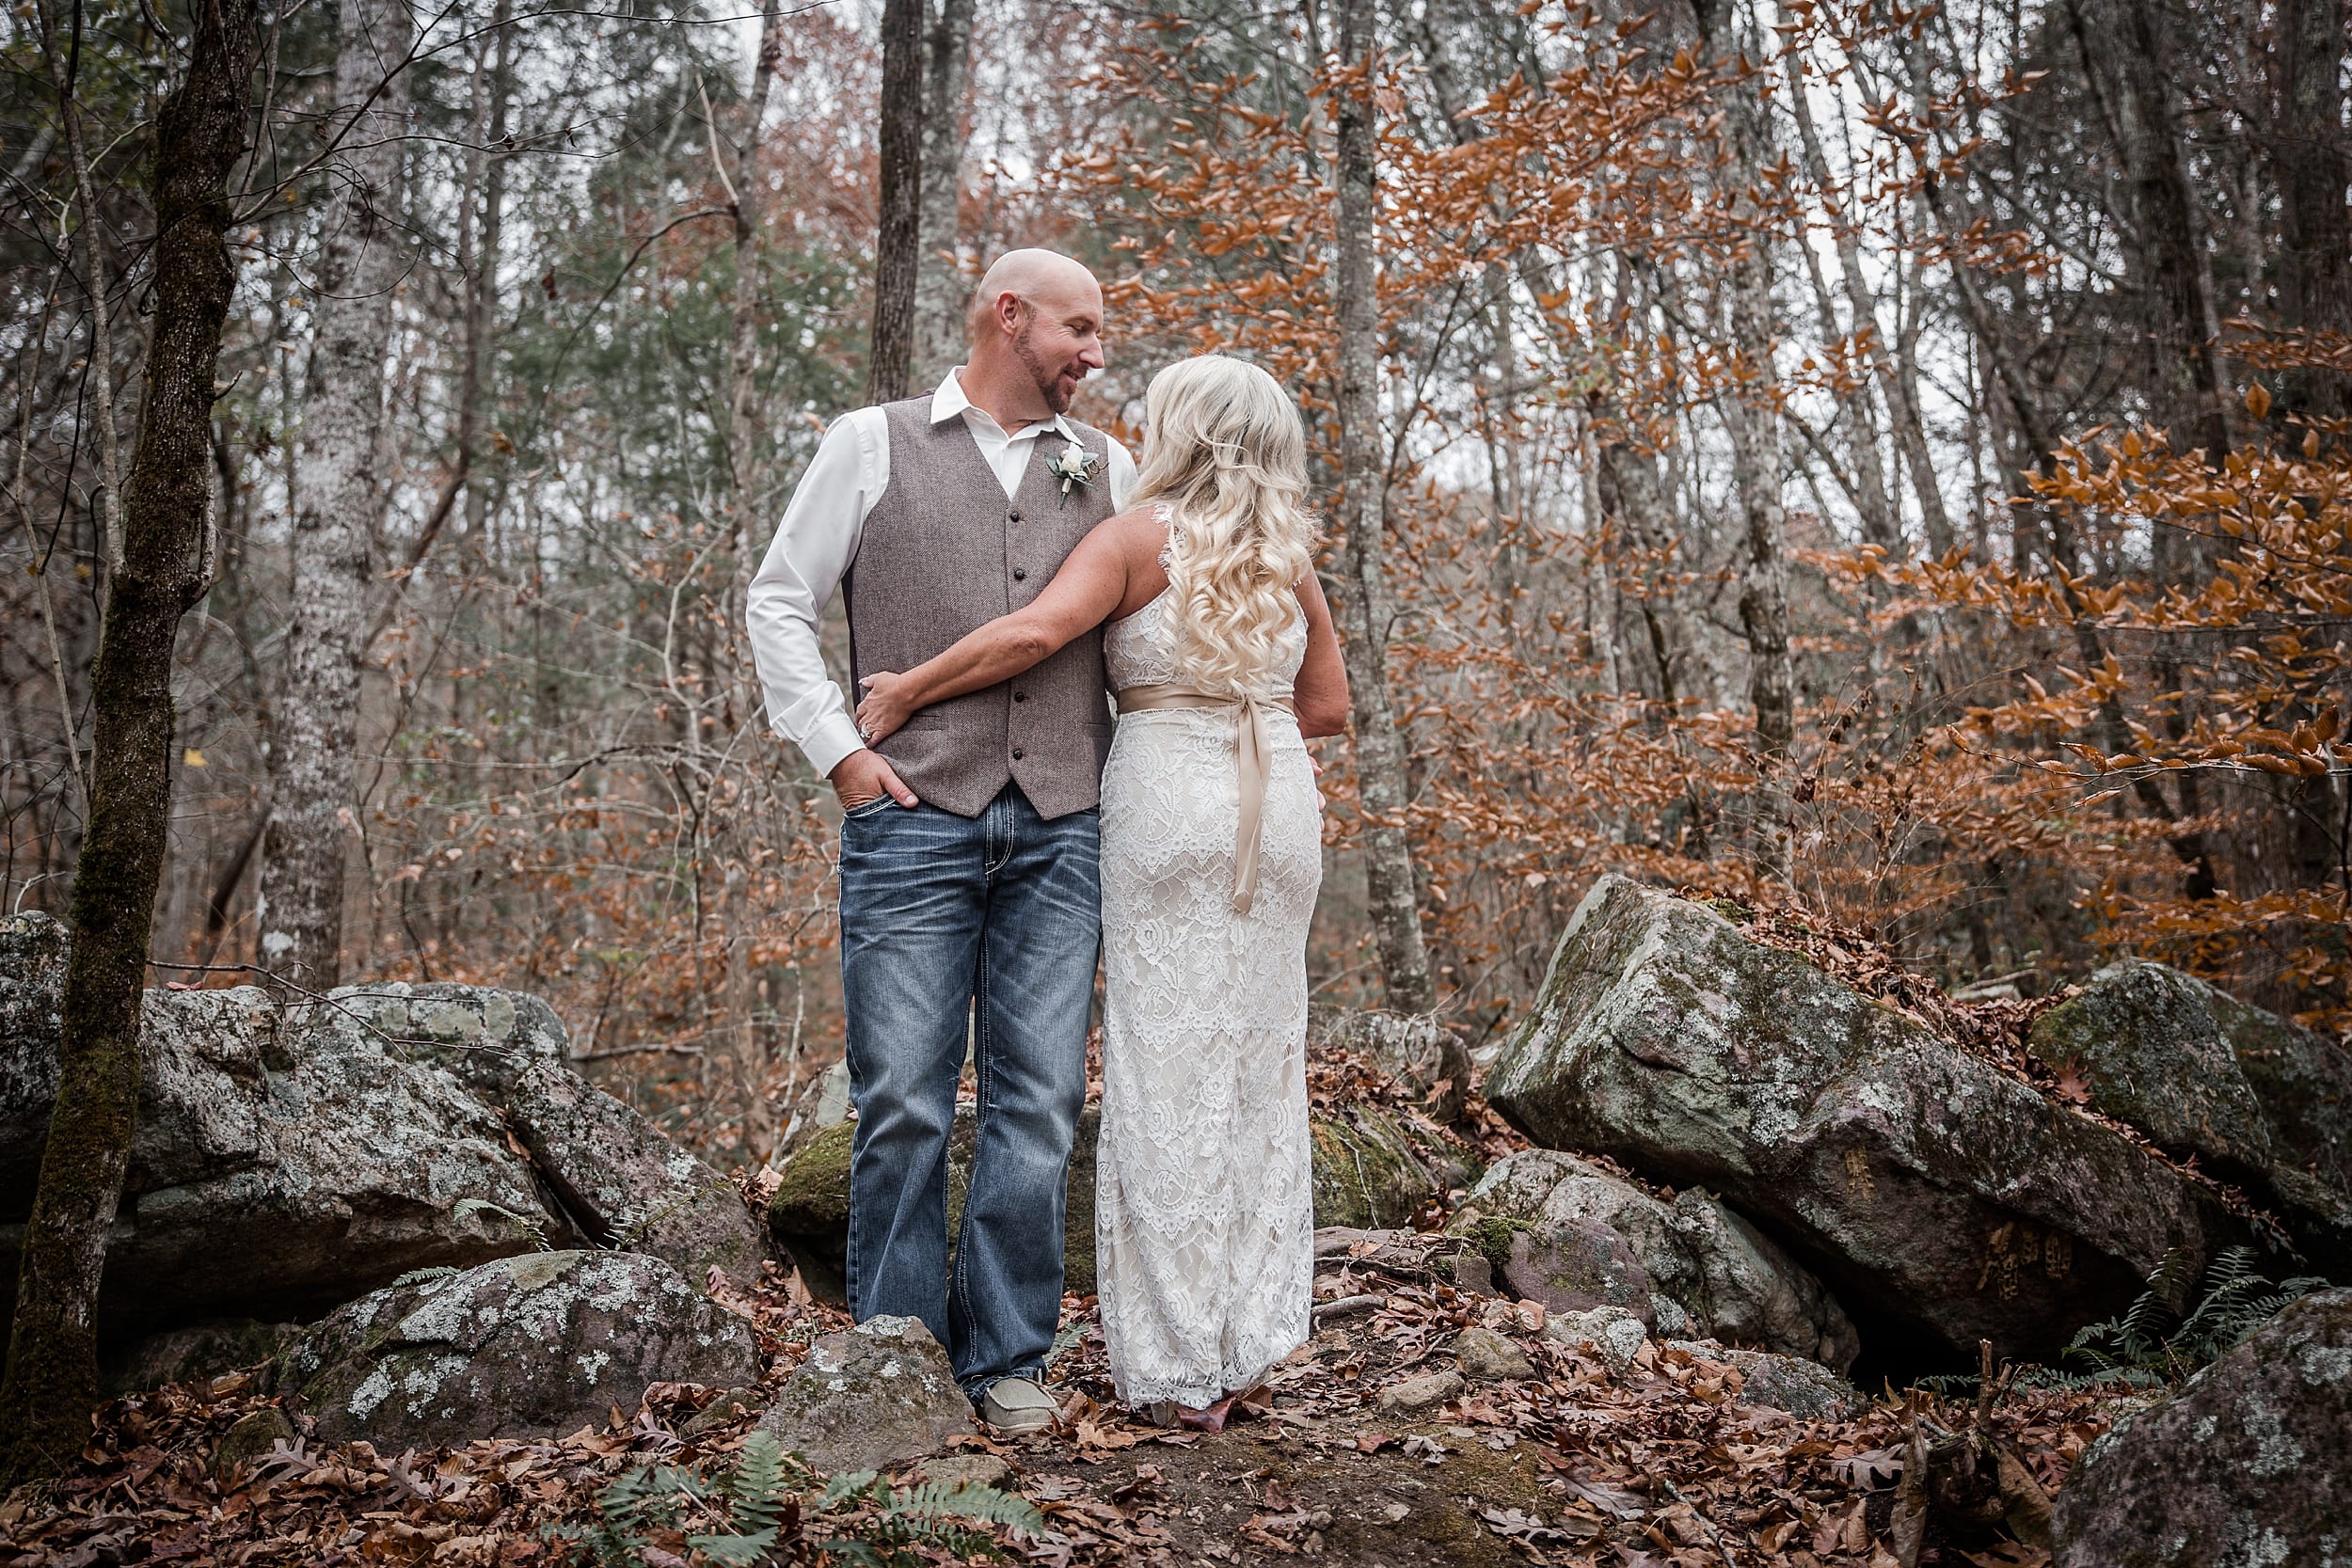 Outdoor bridal portraits at smoky mountain micro wedding location Chapel in the Hollow near Gatlinburg, Tennessee. 